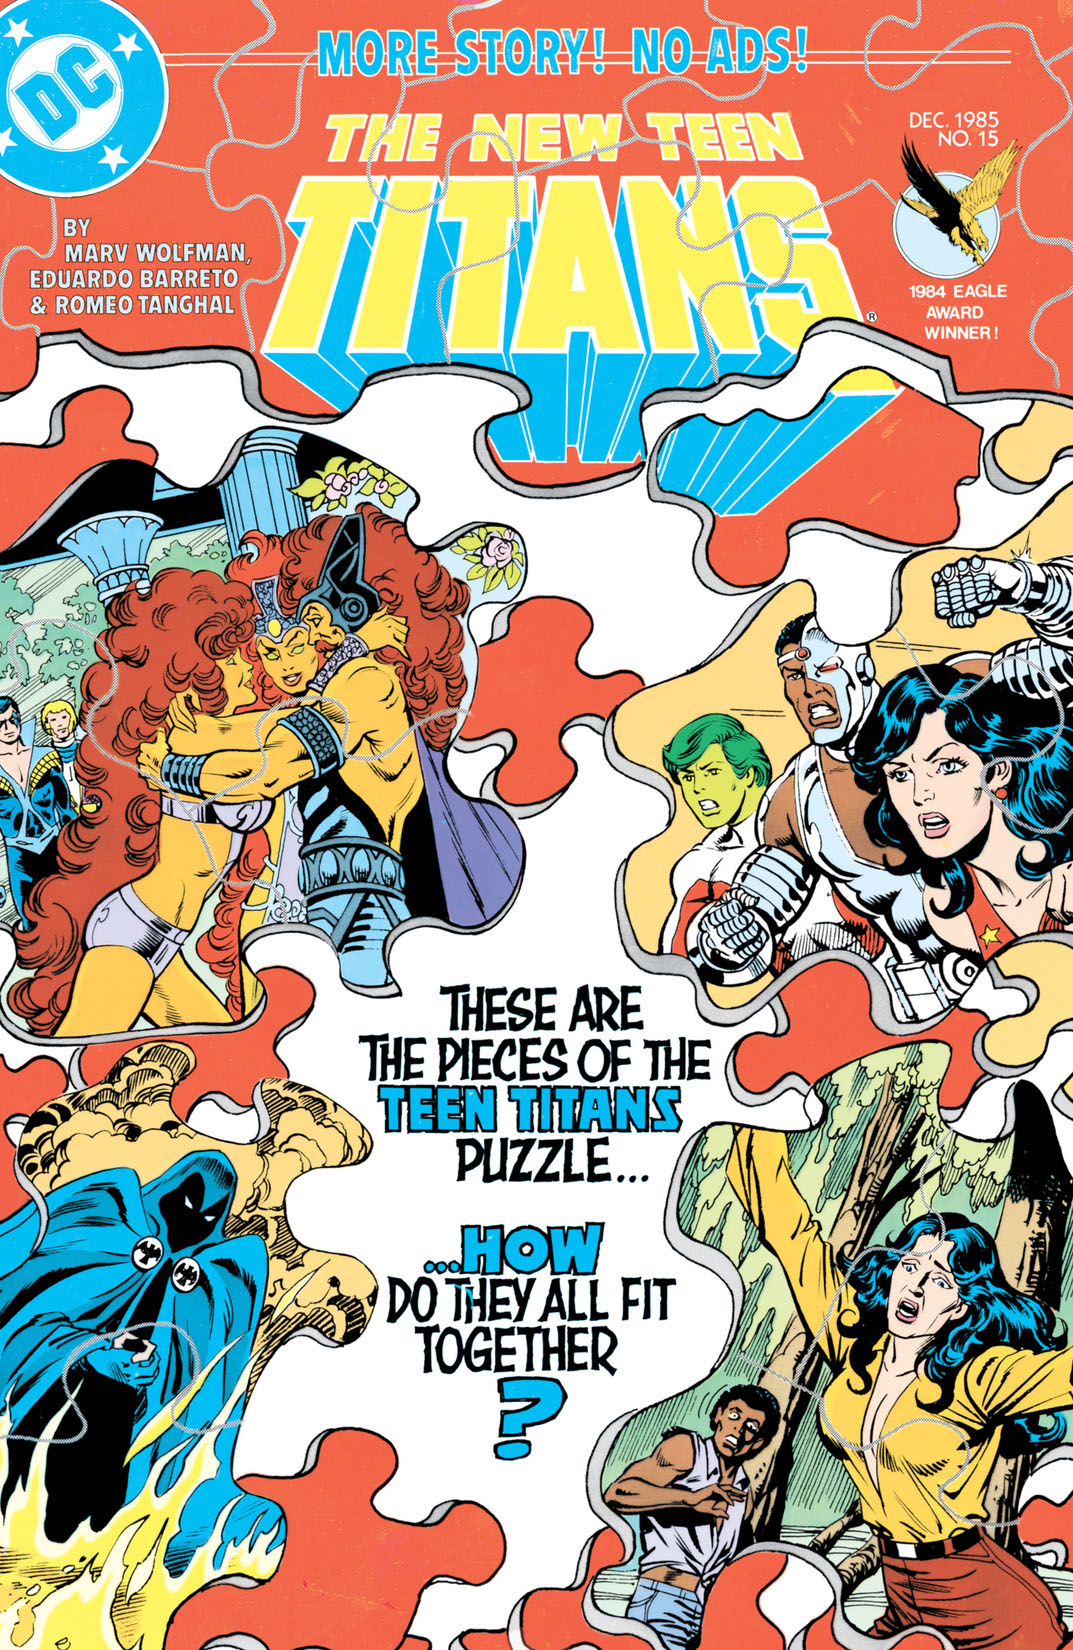 The New Teen Titans #15 preview images